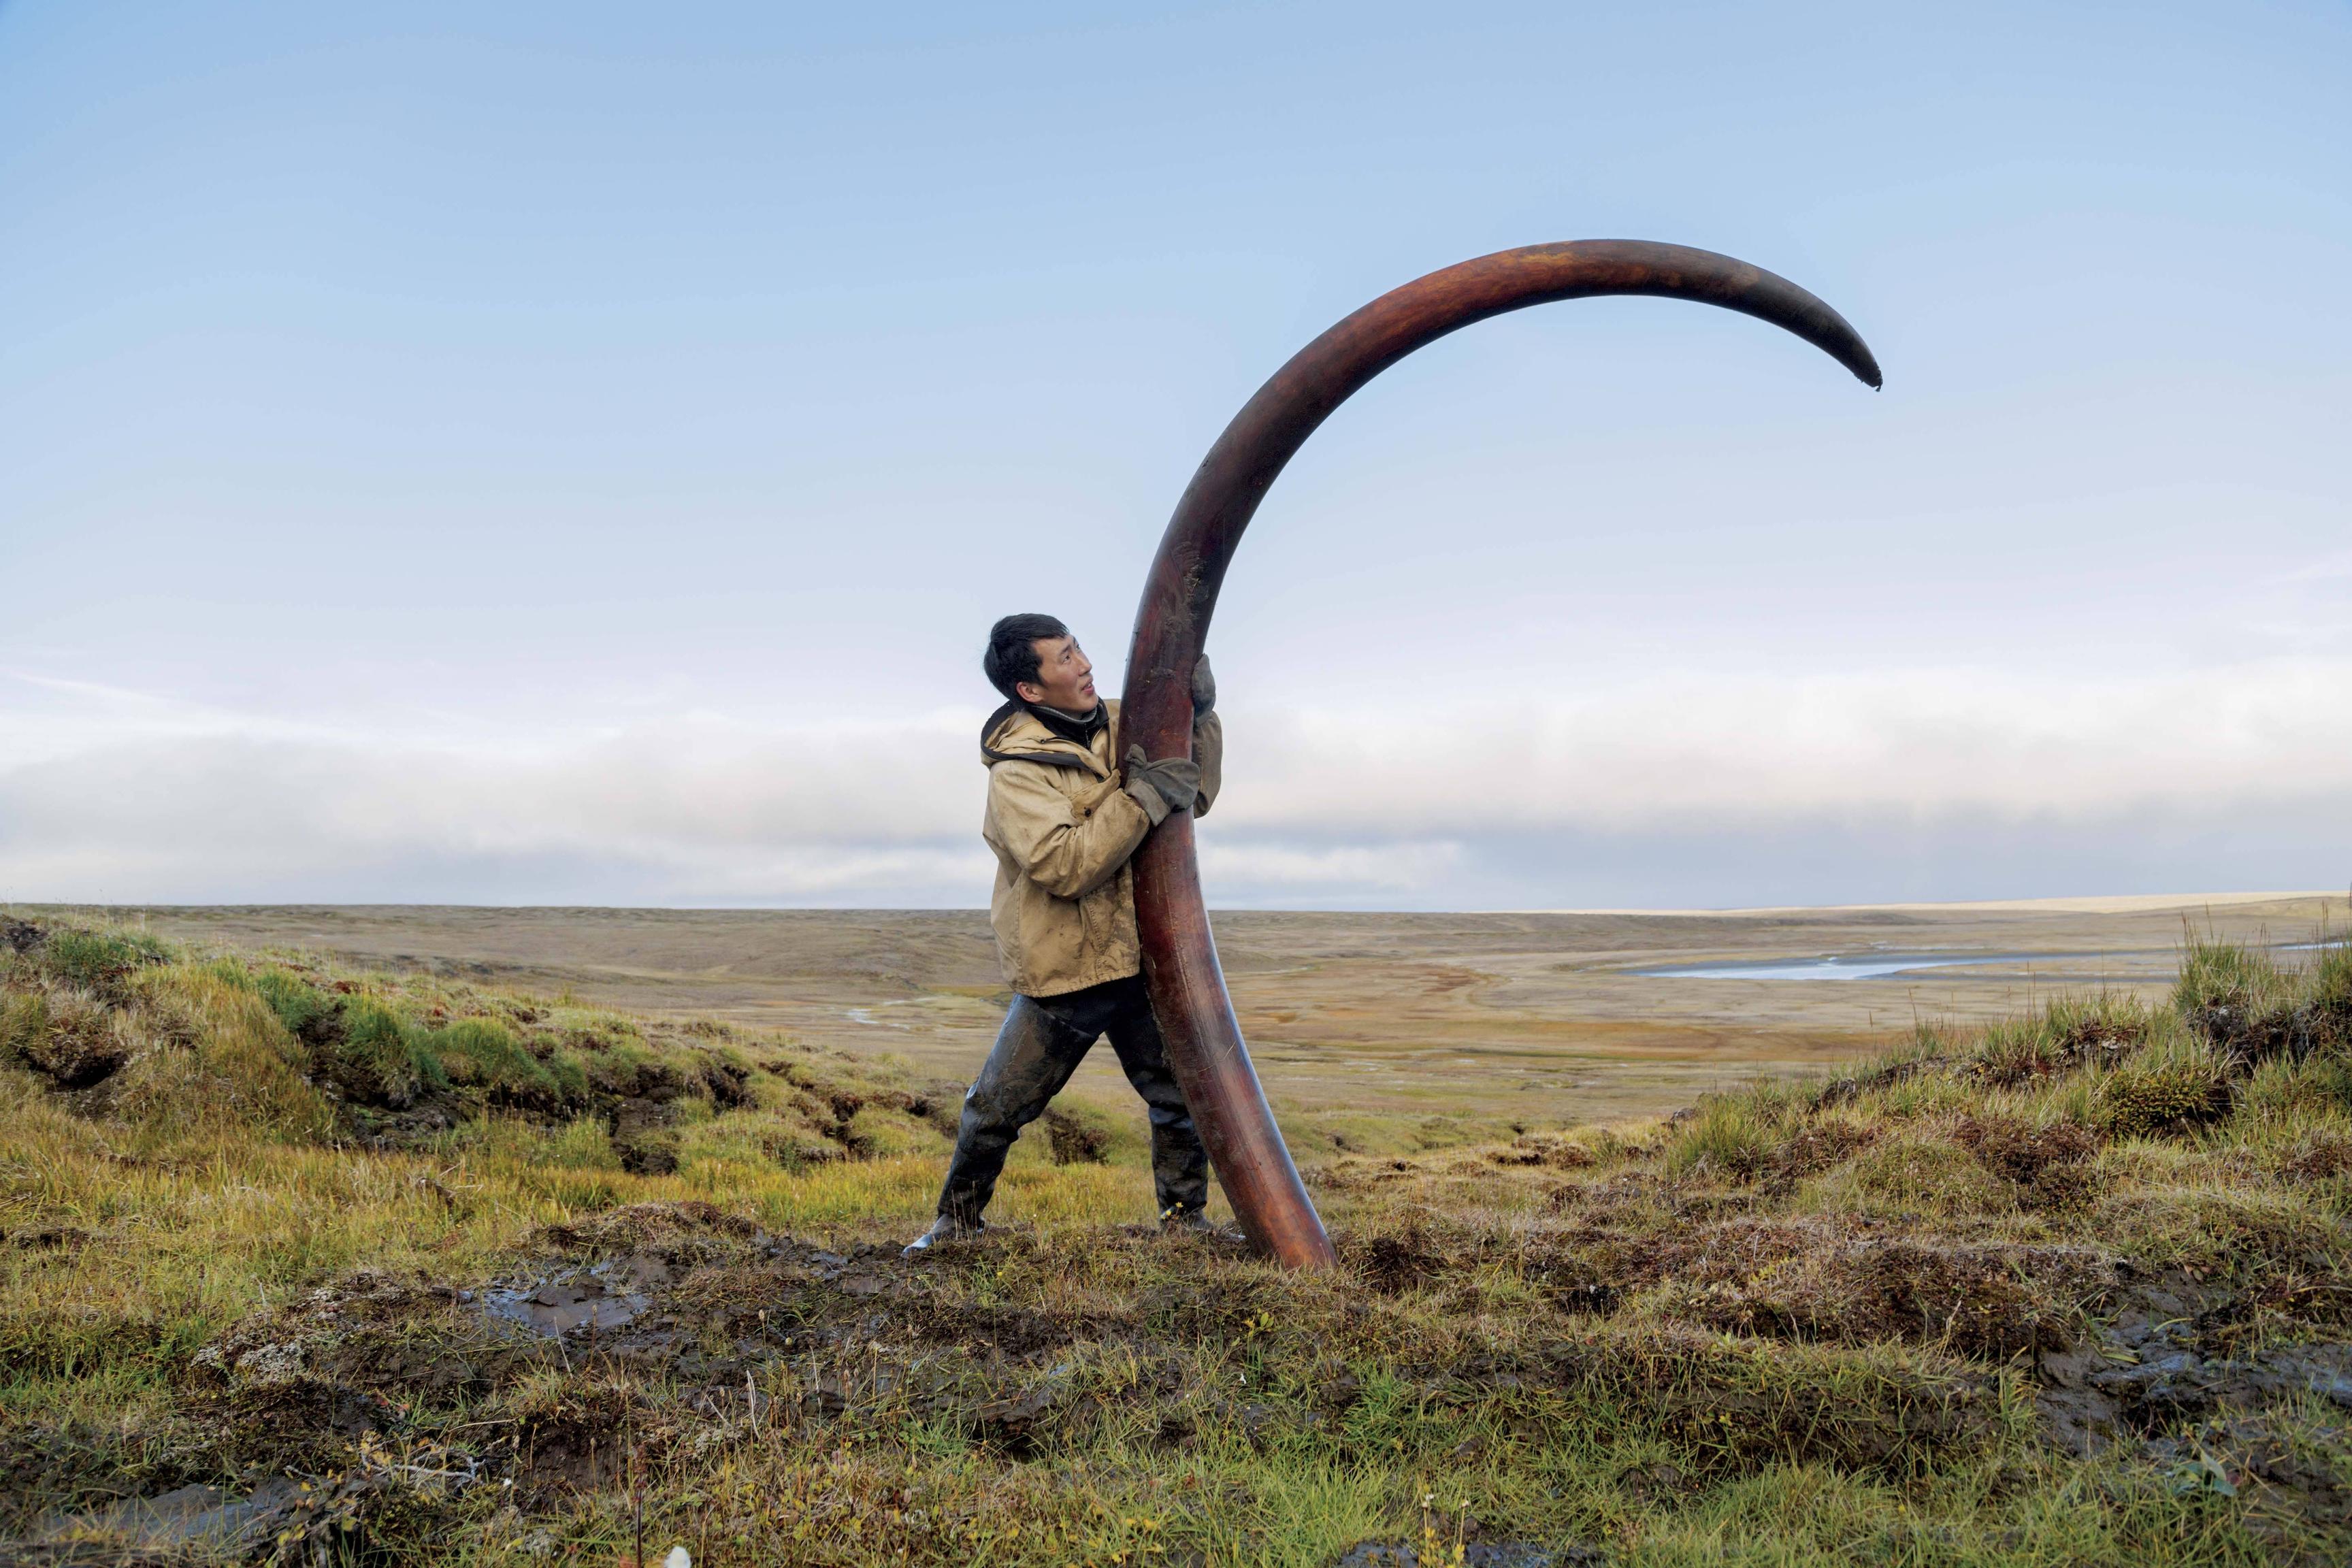 A Woolly mammoth's tusk is unearthed from a riverbed in Siberia